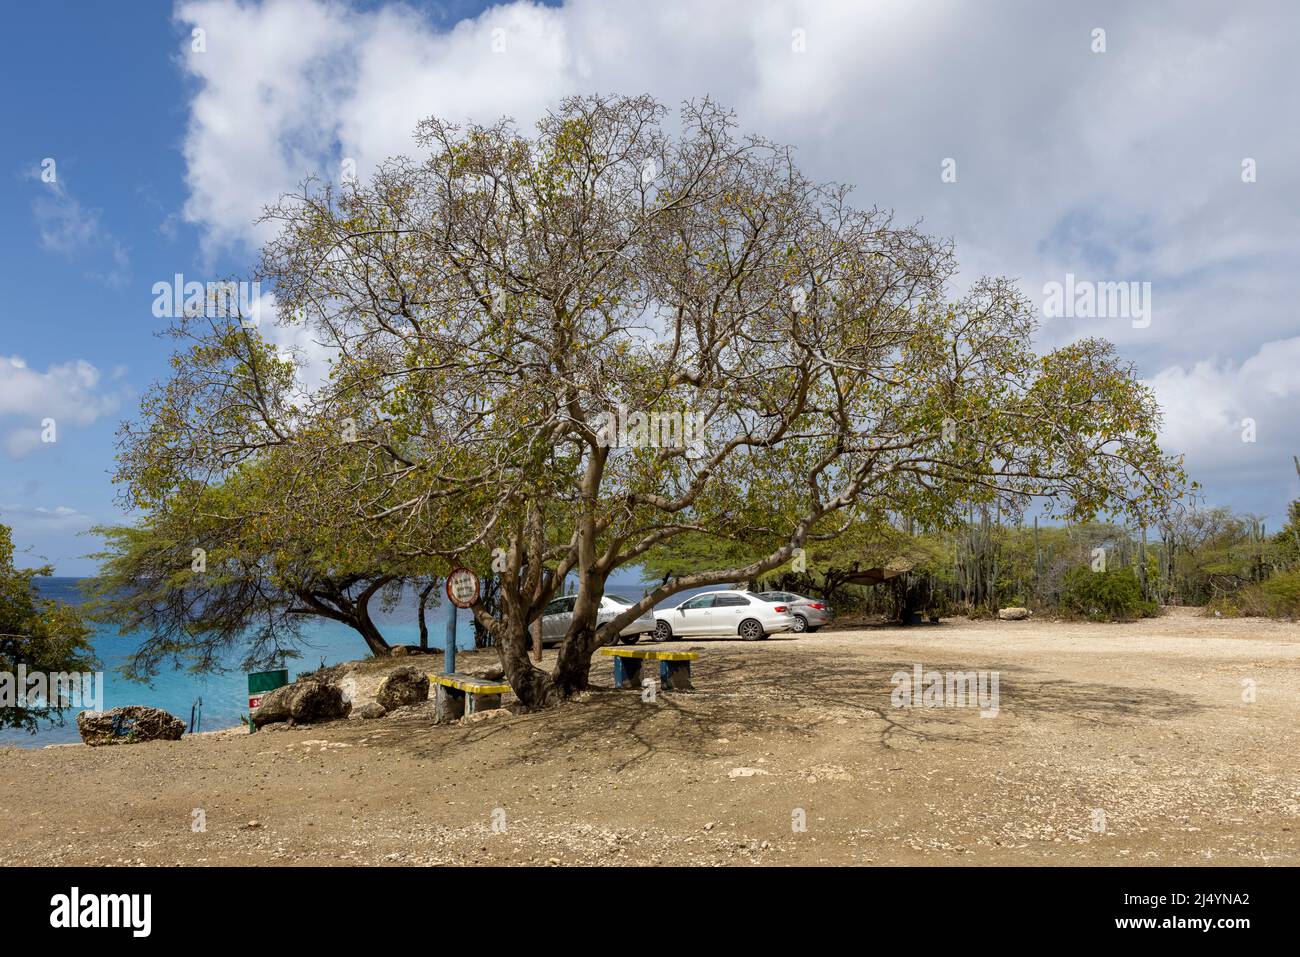 Poisonous manchineel tree at the parking lot of Playa Jeremi on the Caribbean island Curacao Stock Photo